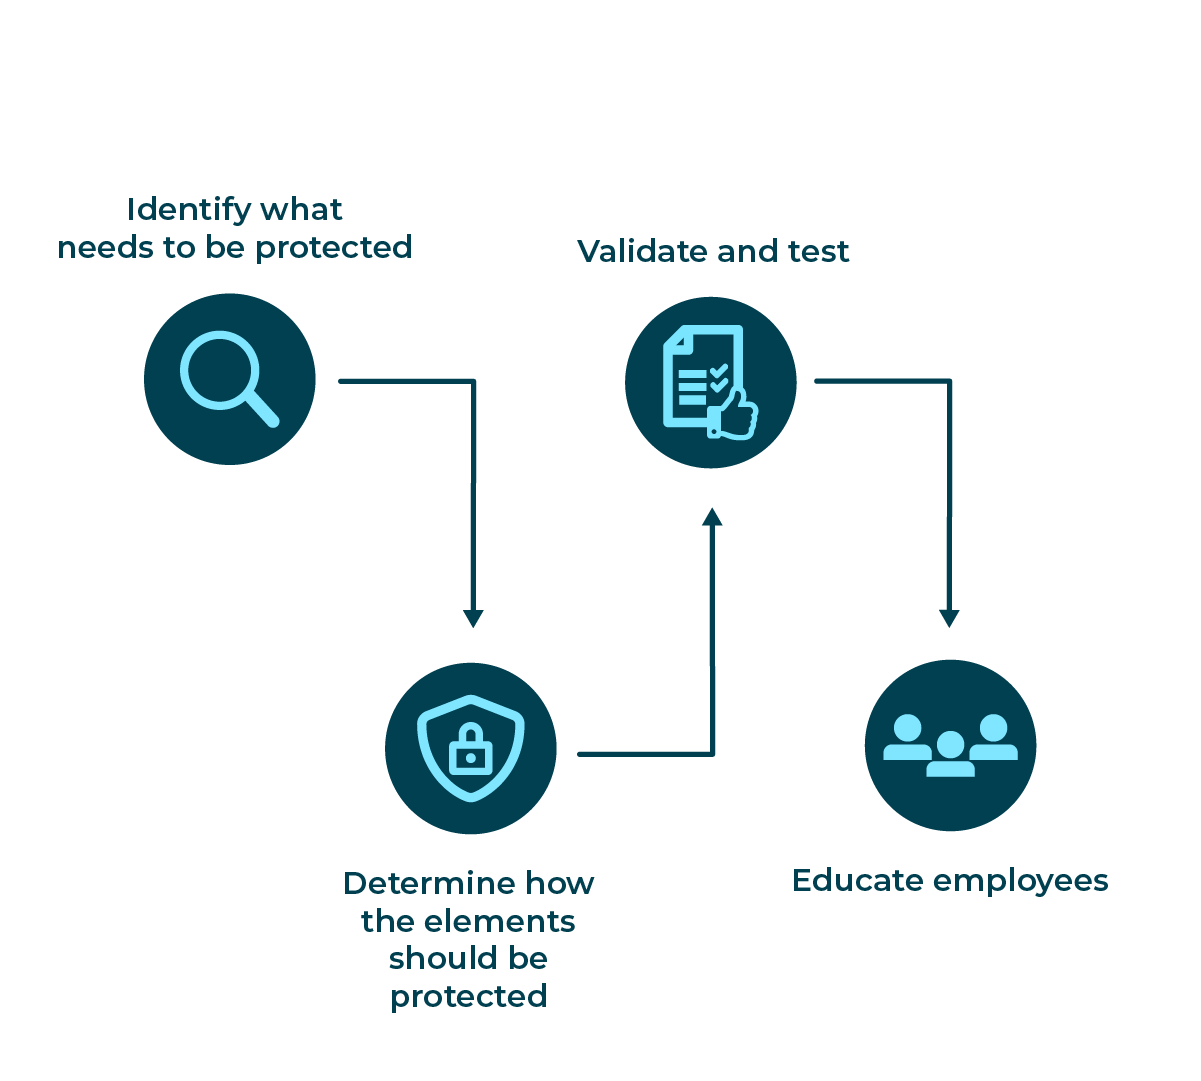 A basic flow chart of the business continuity management process. The process starts with identifying what needs to be protected, then determining how the elements should be protected, then validating and testing, and lastly, educating employees.